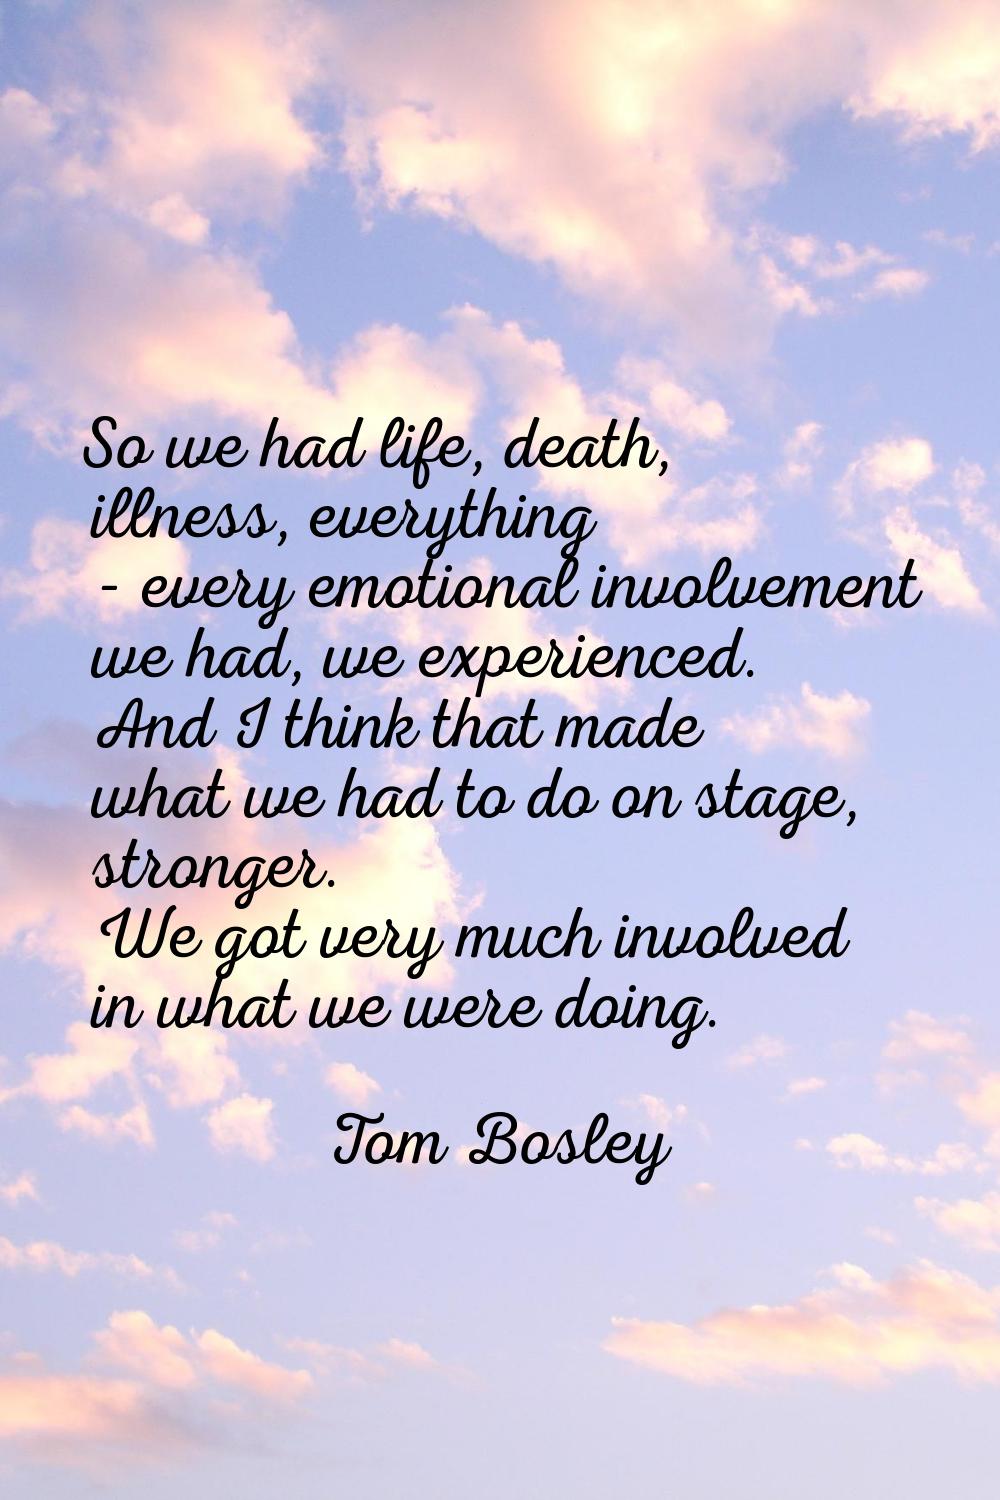 So we had life, death, illness, everything - every emotional involvement we had, we experienced. An